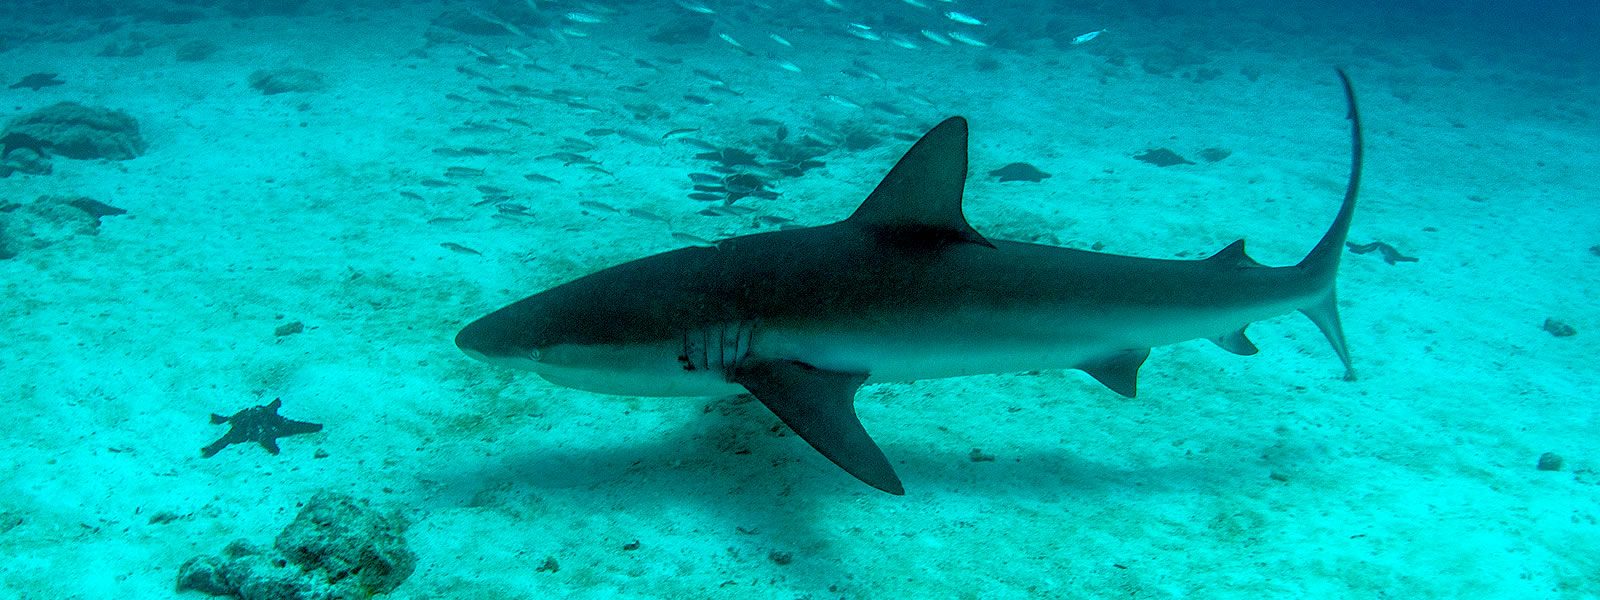 Image of a Galapagos shark, Carcharhinus galapagensis, swimming over a sandy seafloor.